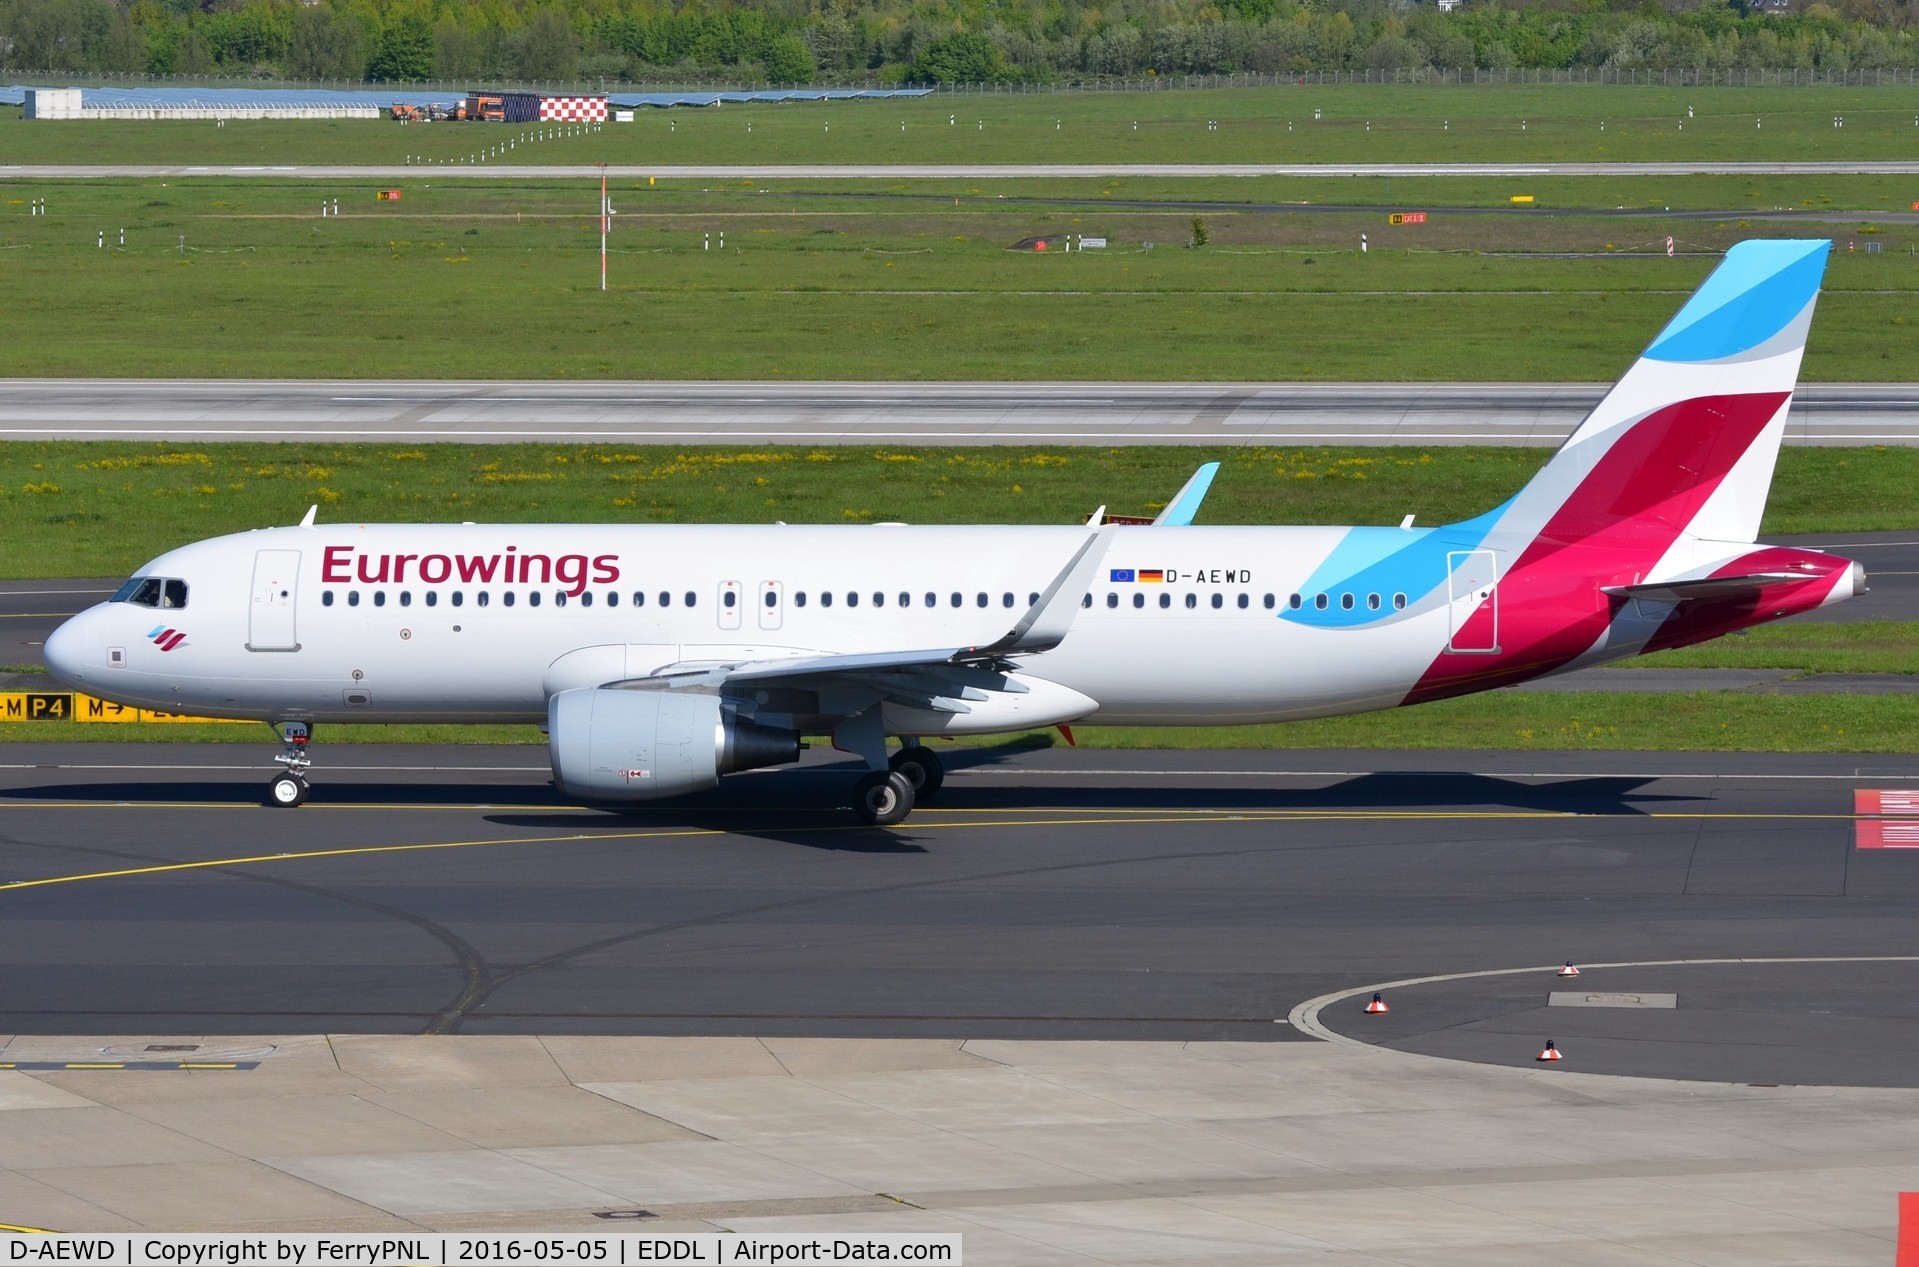 D-AEWD, 2016 Airbus A320-214 C/N 7019, Eurowings A320 taxiing for departure.